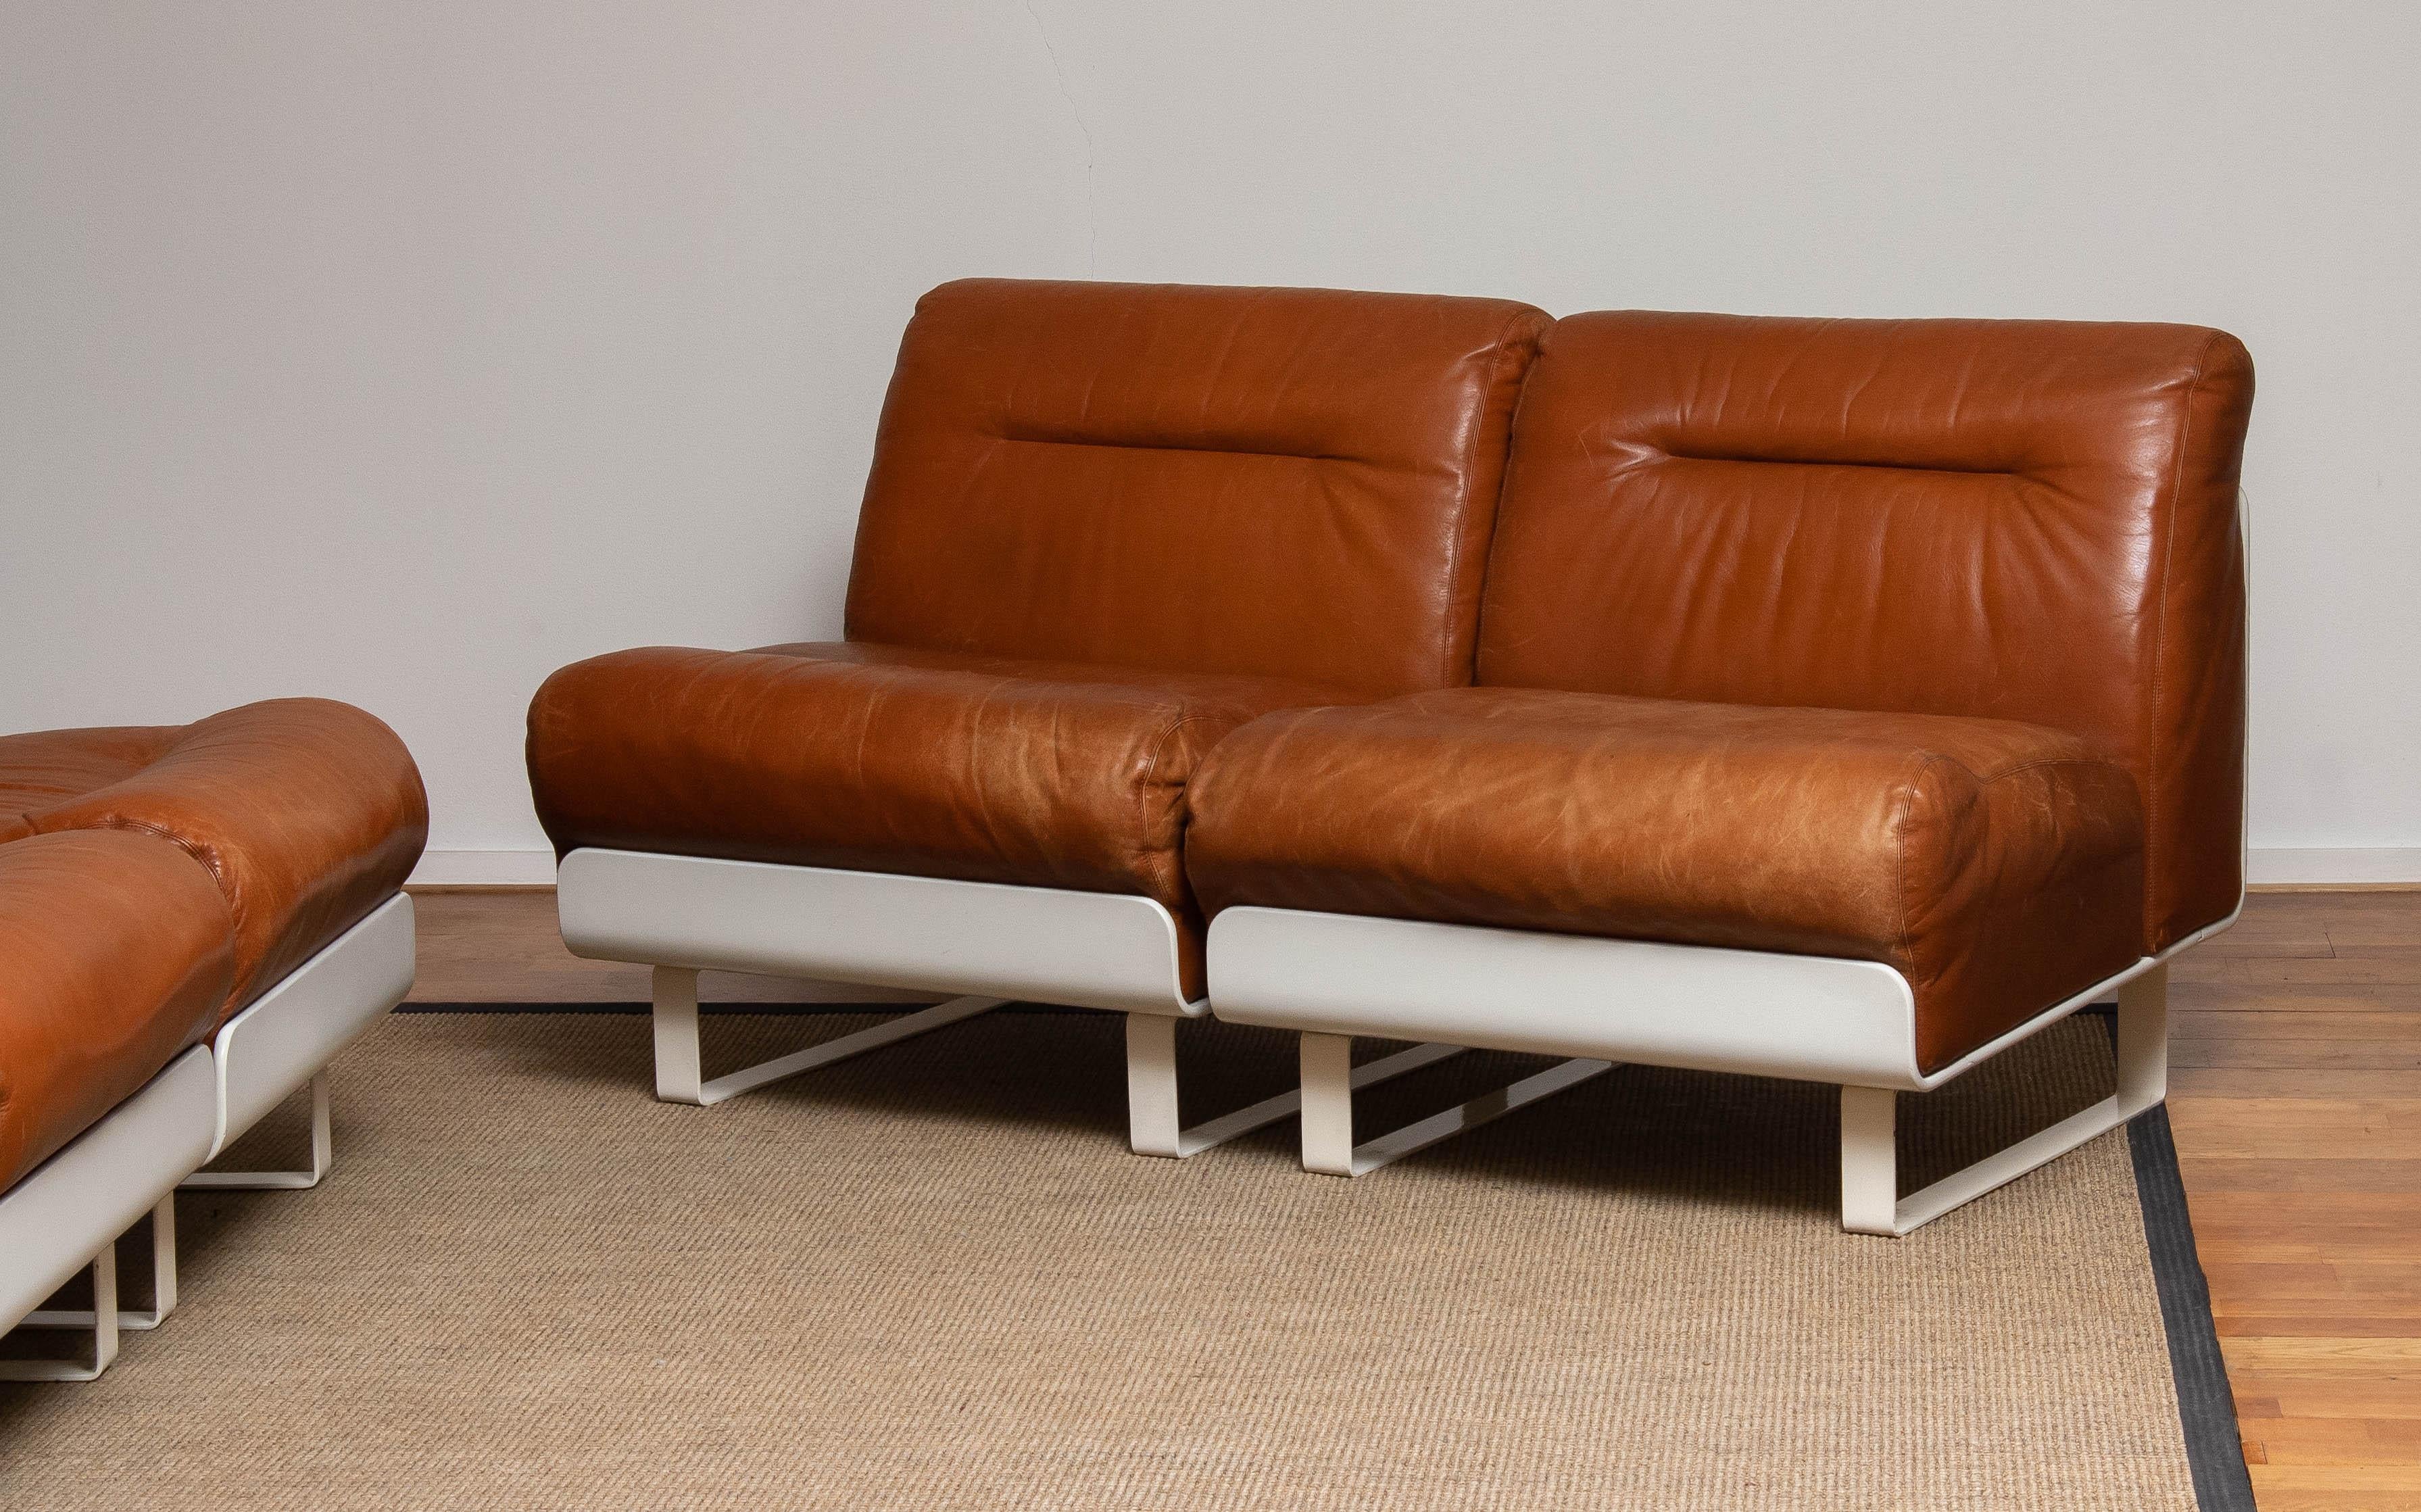 German '70s Tan / Cognac Leather Sectional Sofa / Club Chairs by Luici Colani for COR